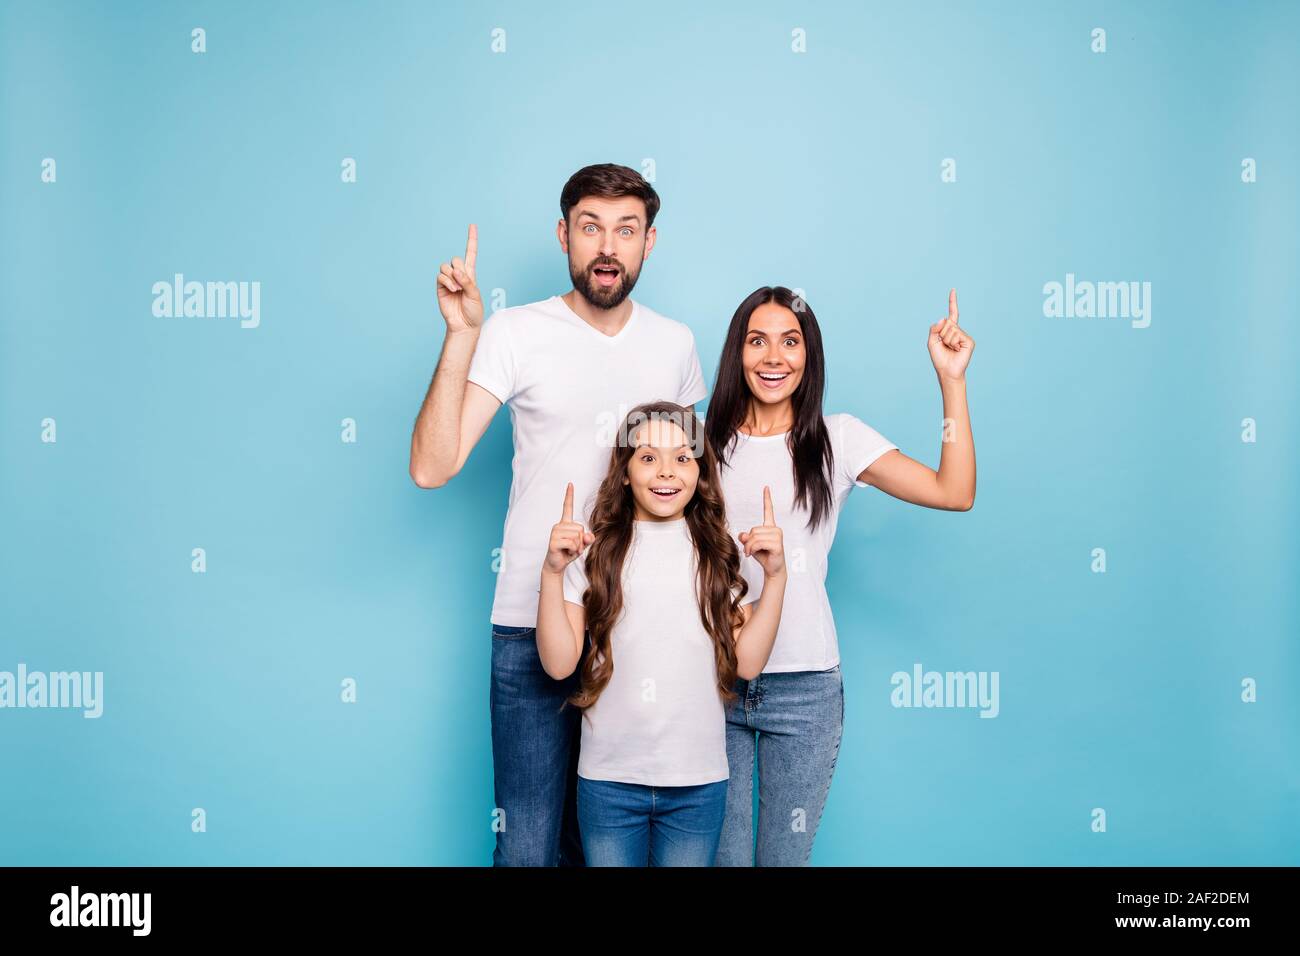 Portrait of excited funky three people promoters mom dad schoolkid with brown hair recommend sales ads select up ways wear white t-shirt denim jeans Stock Photo